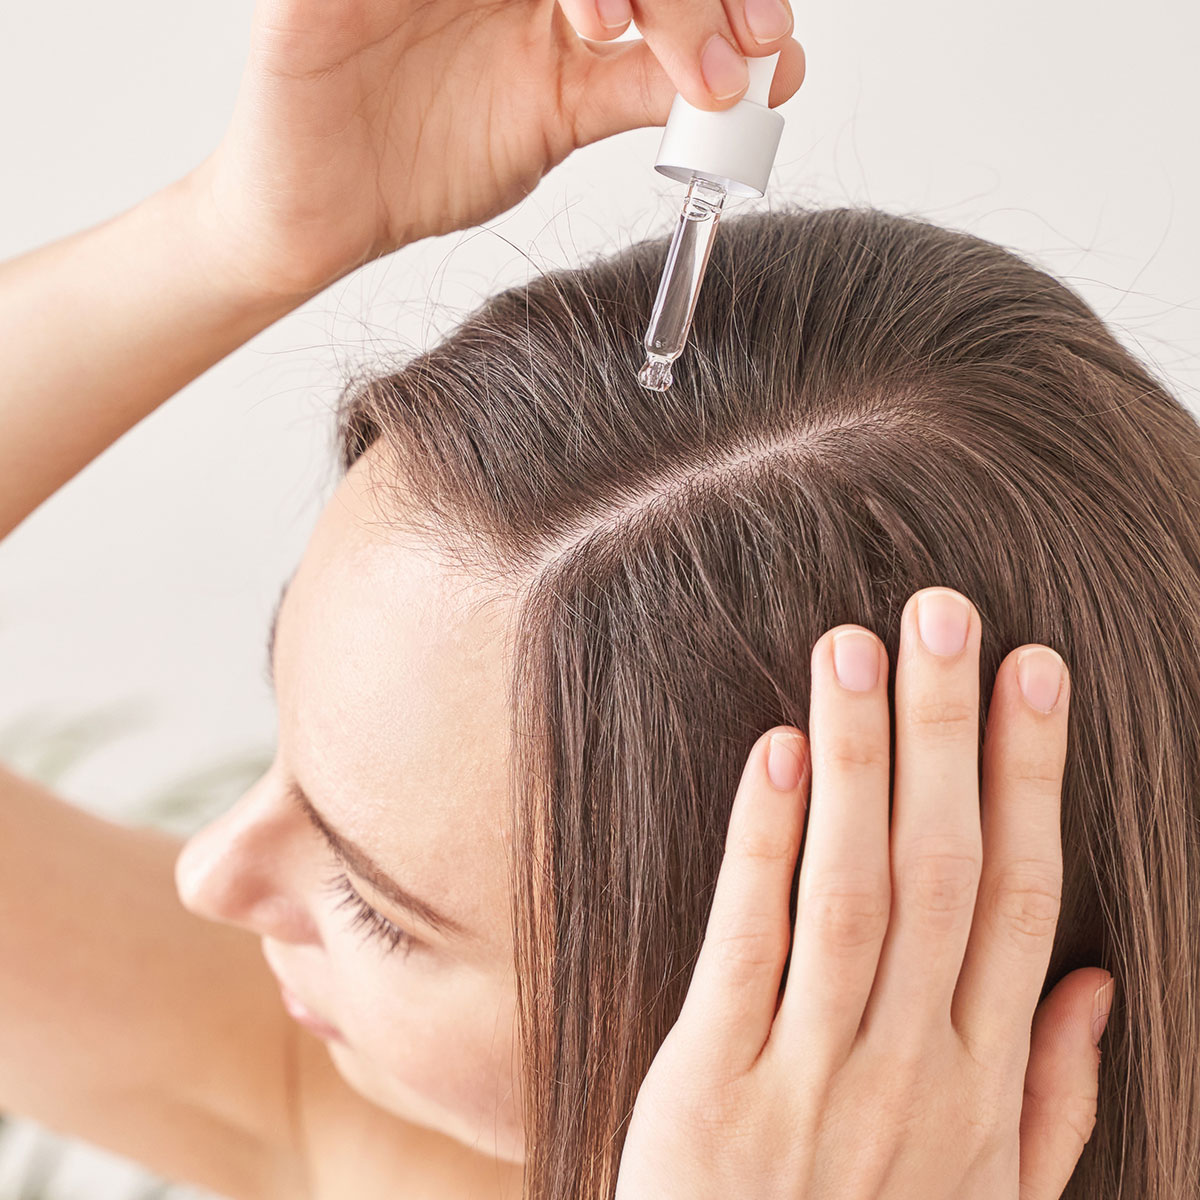 Hair Experts Swear By These 3 Serums To Boost Volume And Thickness -  SHEfinds